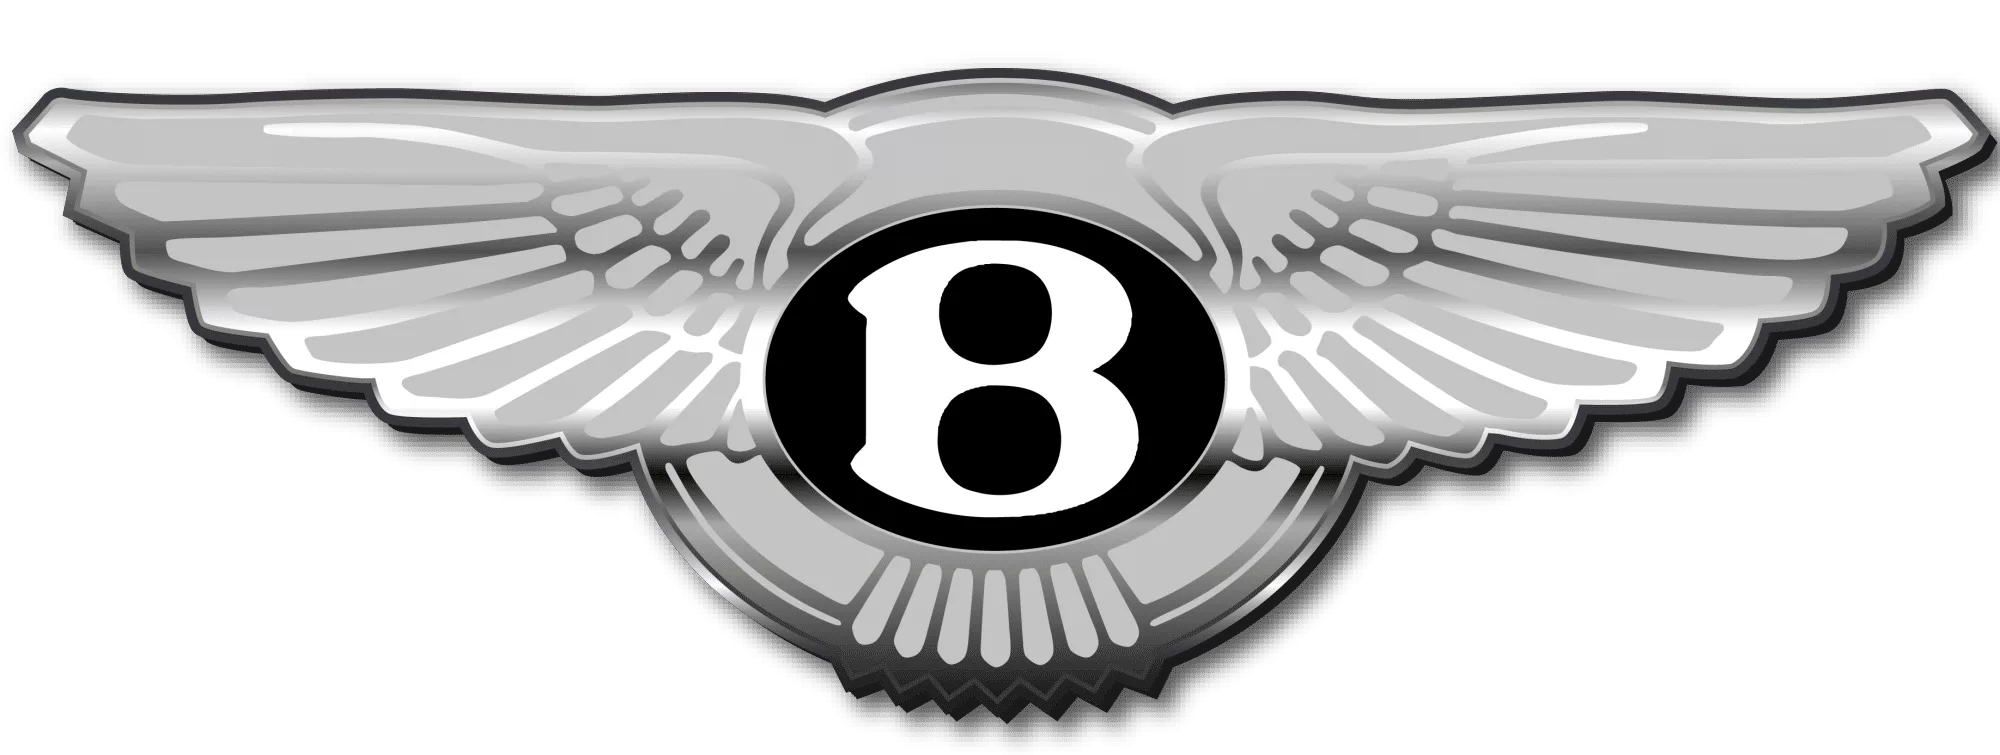 Winged emblem with a black and white number 8 at the center, featuring silver detailing and stylized white feathers on each side.